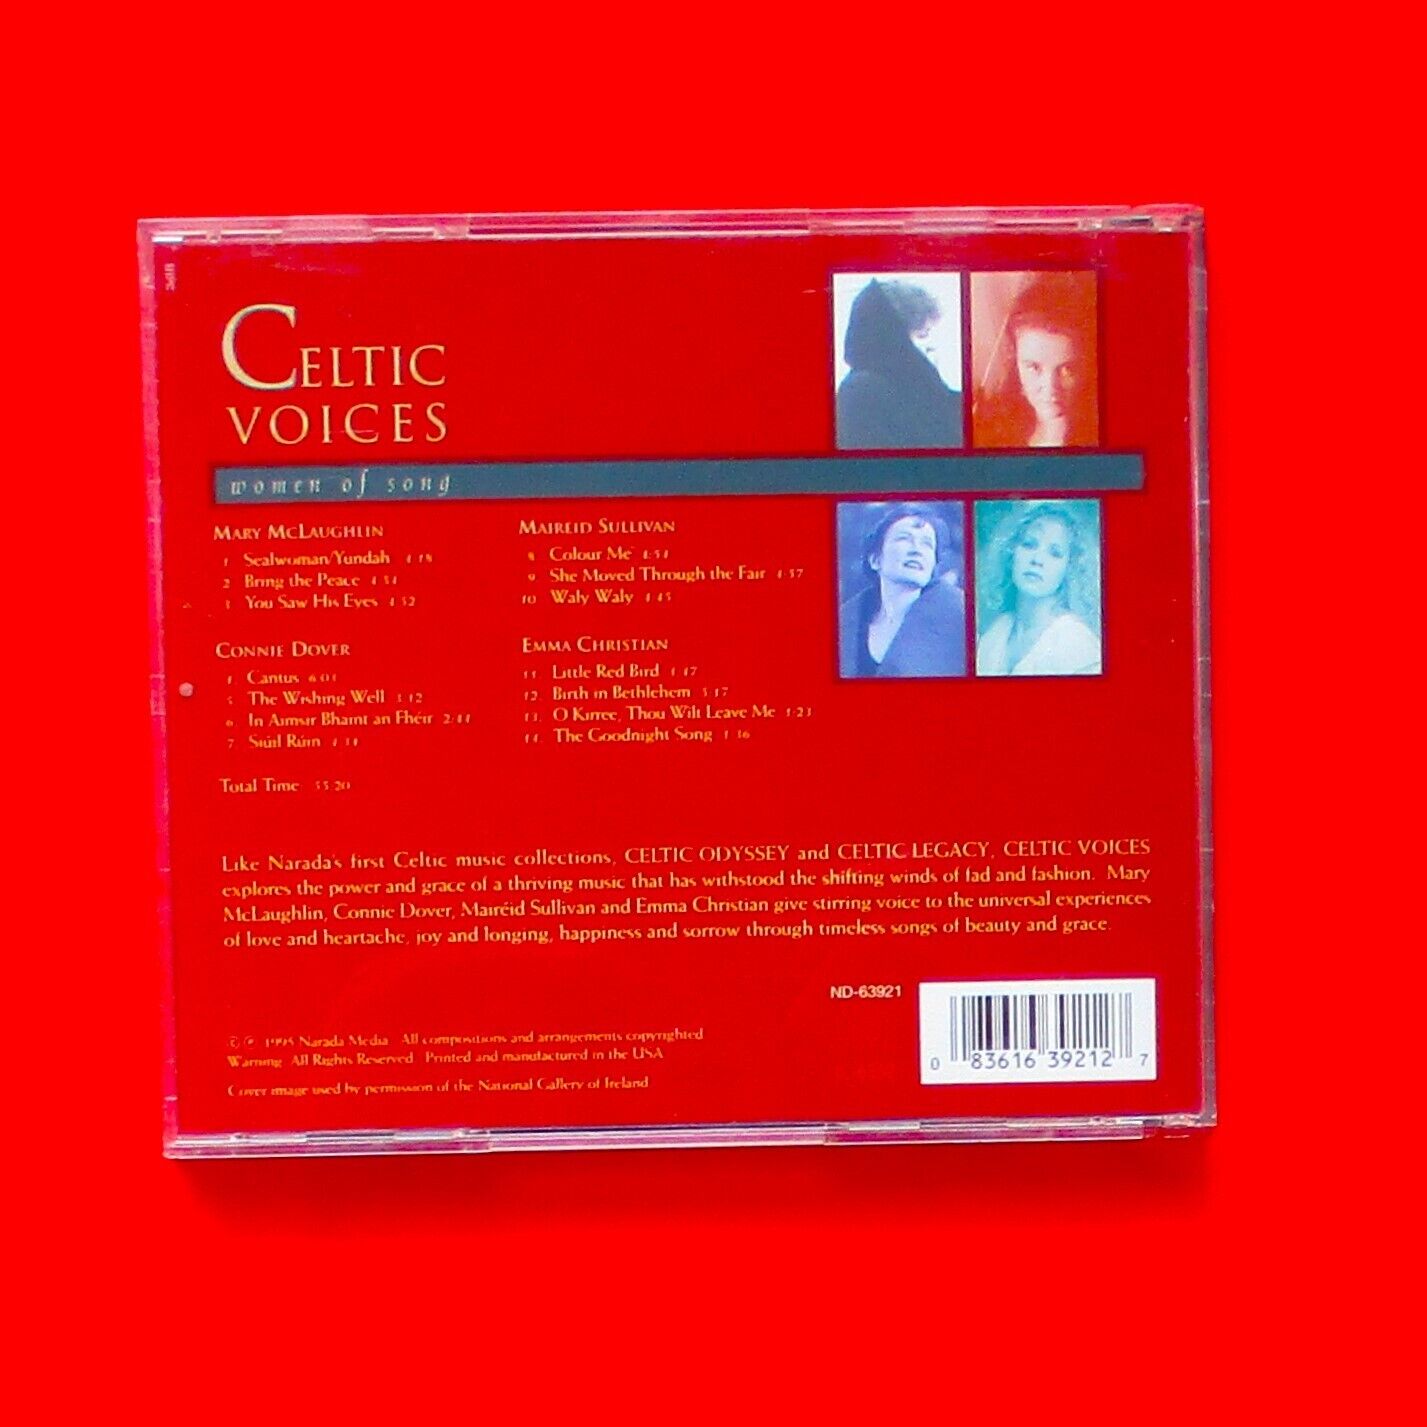 Celtic Voices Women Of Song Various 1995 CD Compilation Album US & Canada